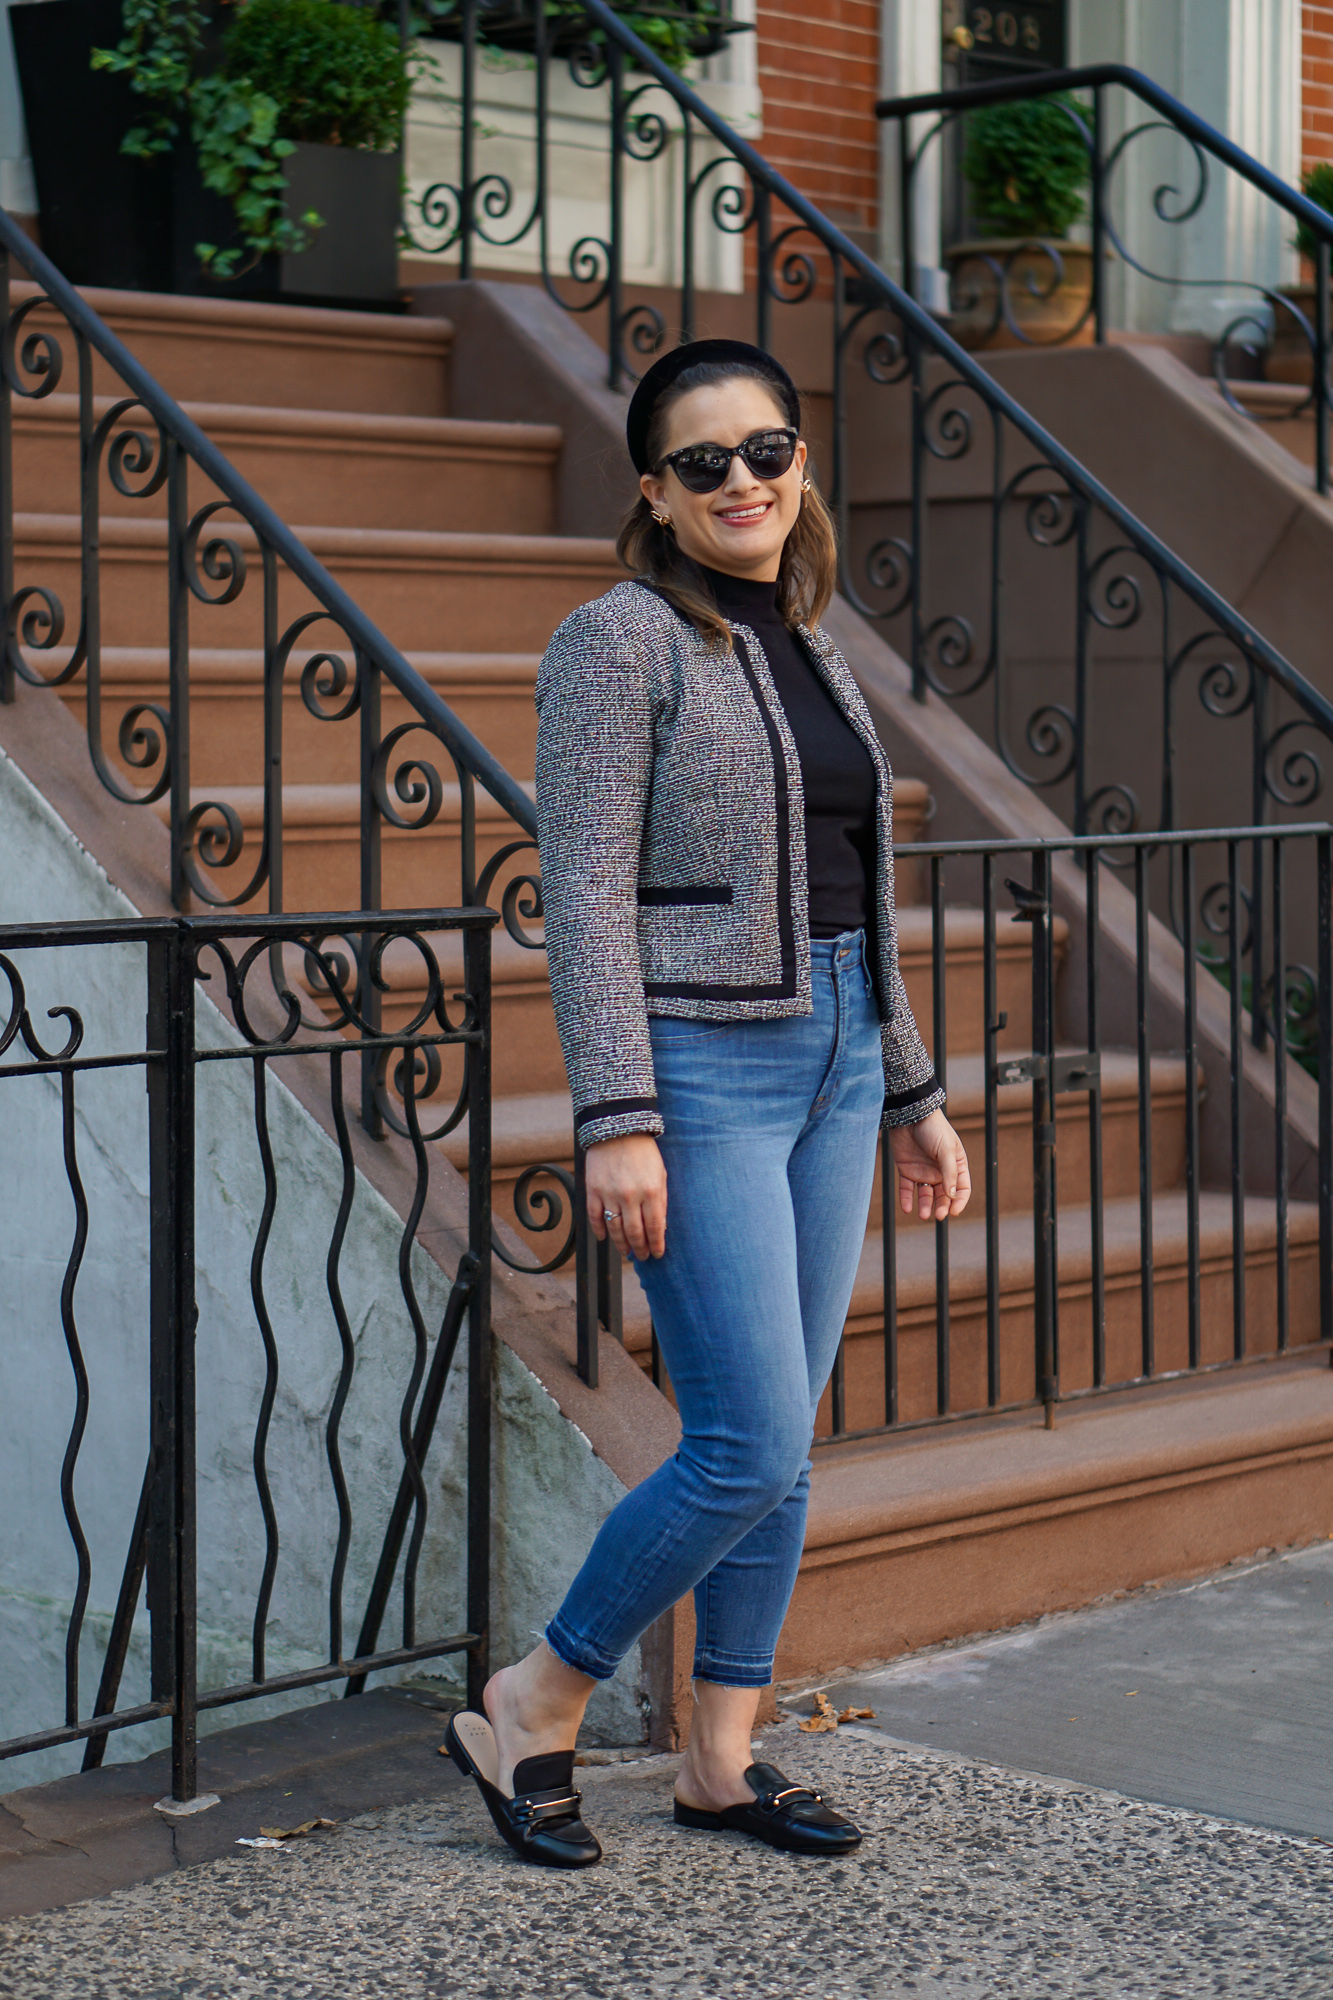 Tweed blazer and jeans